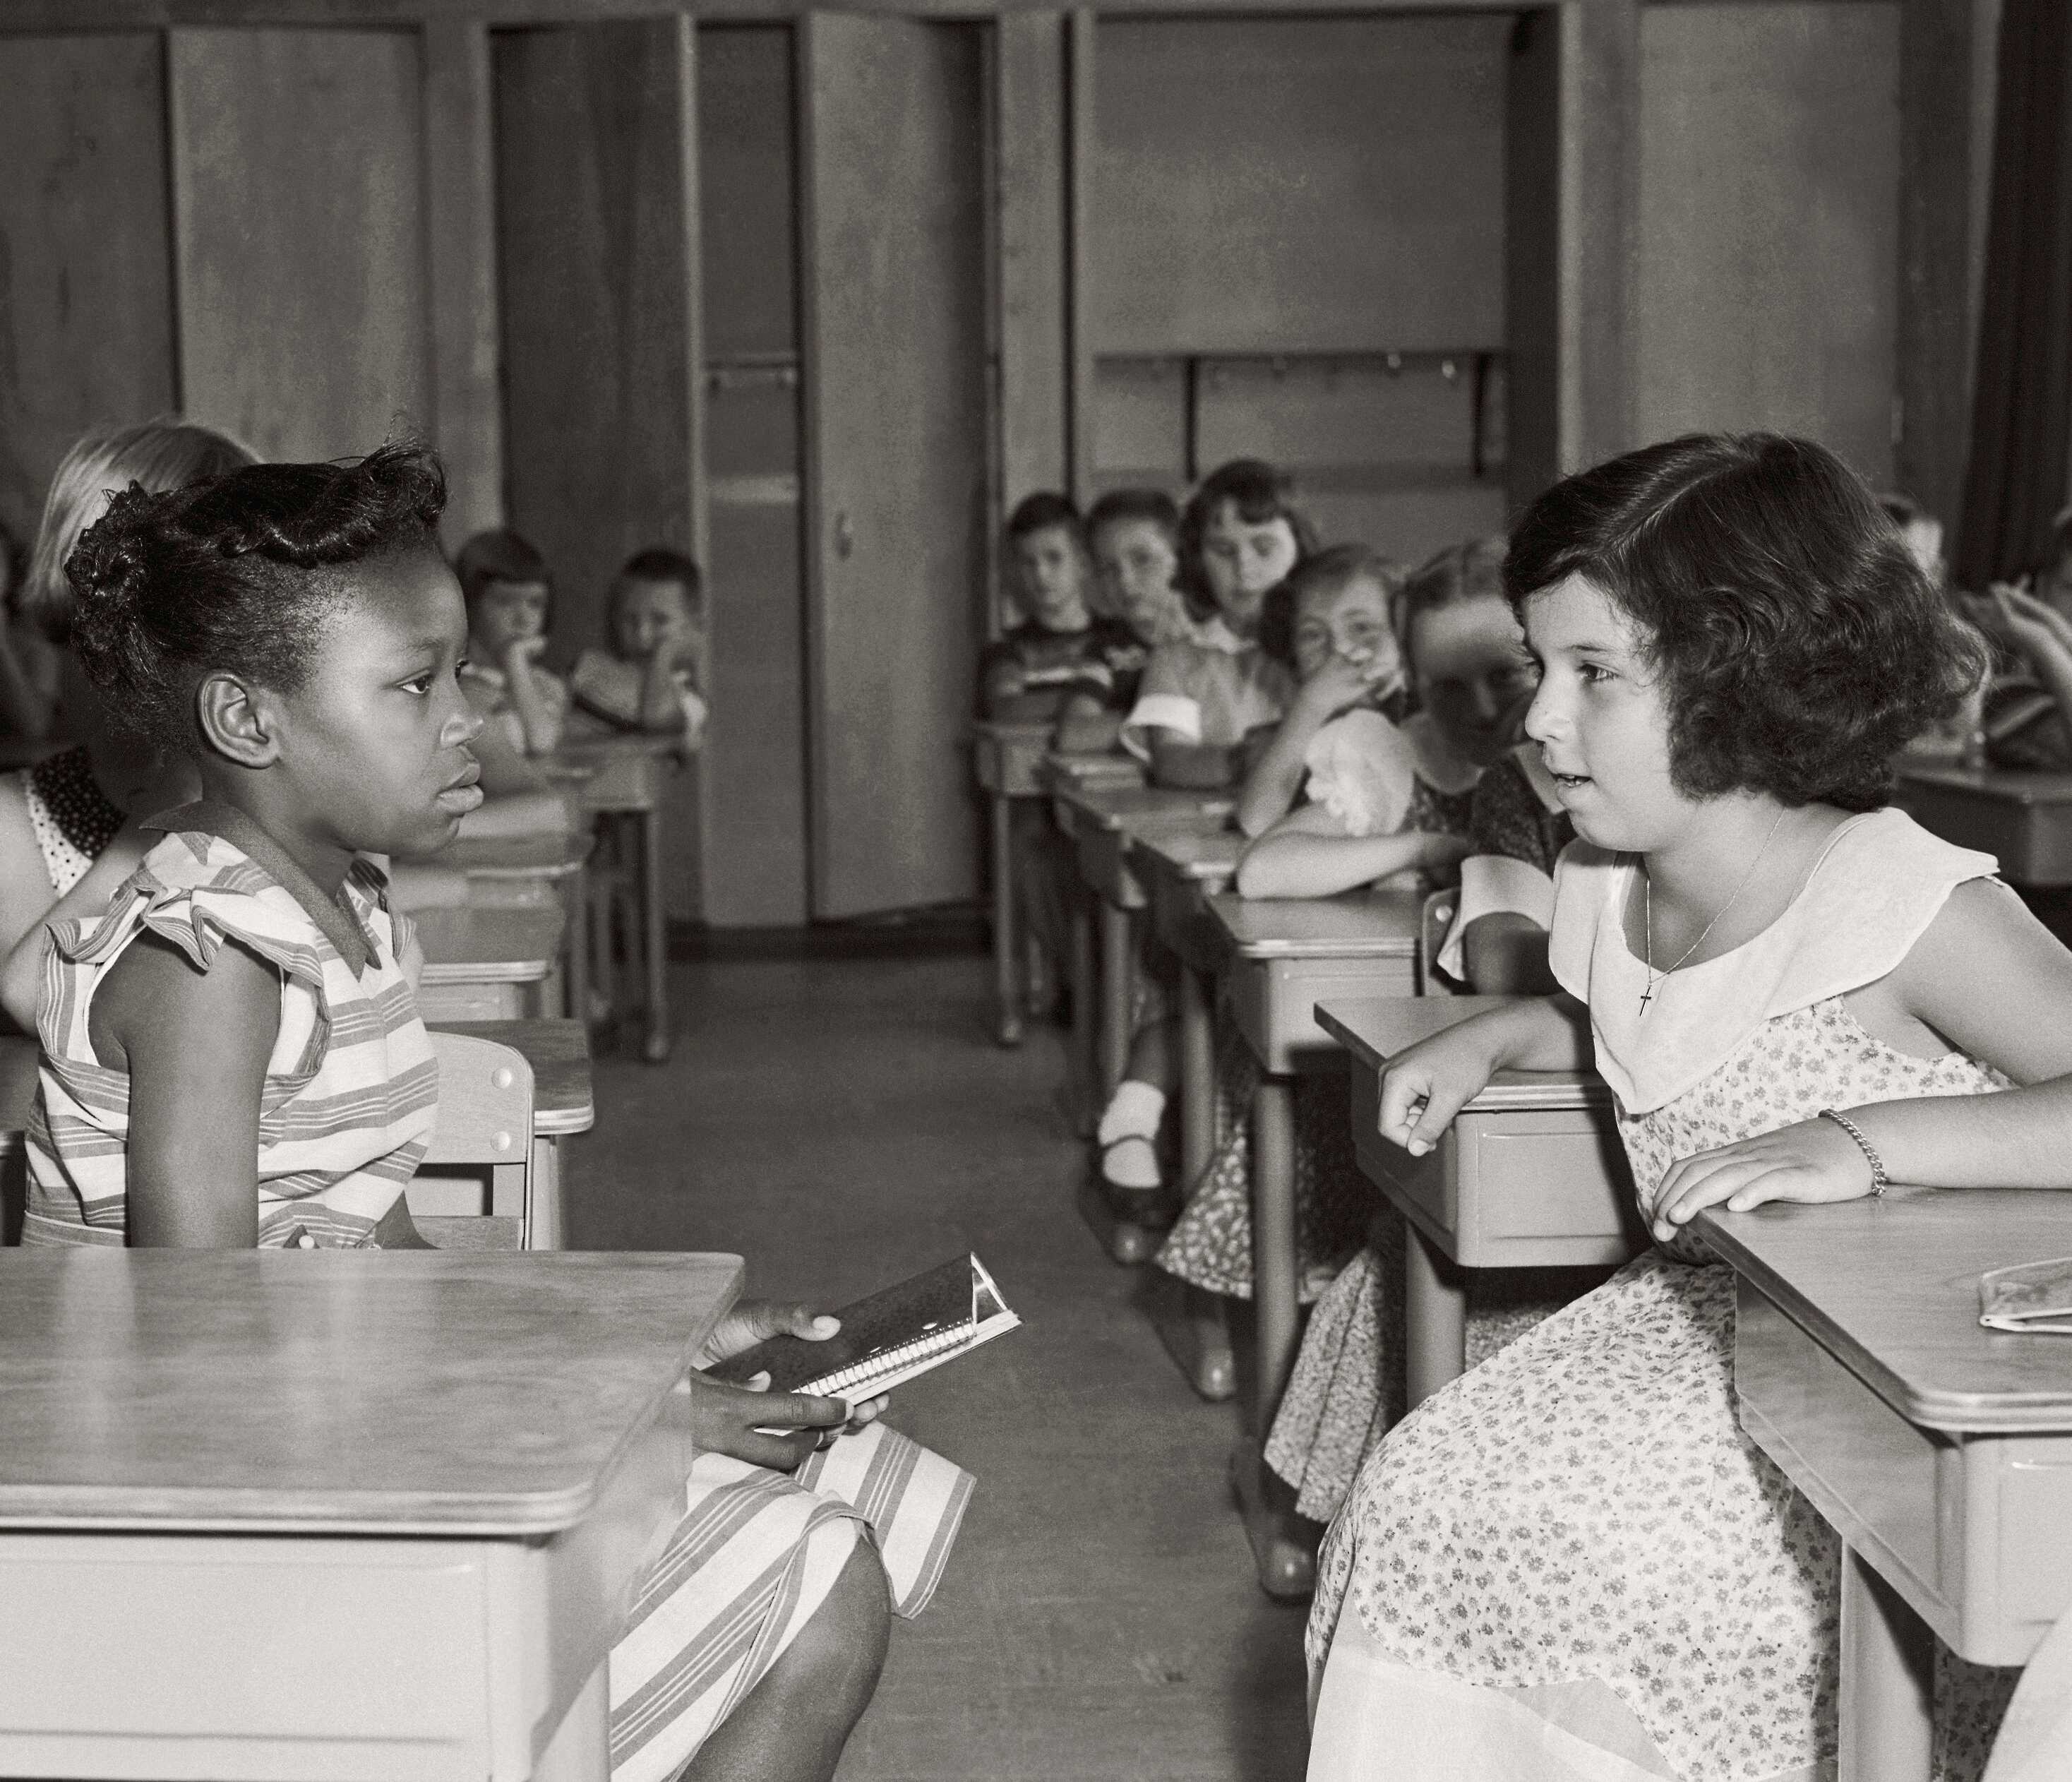 Photograph of children on the first day of desegregation